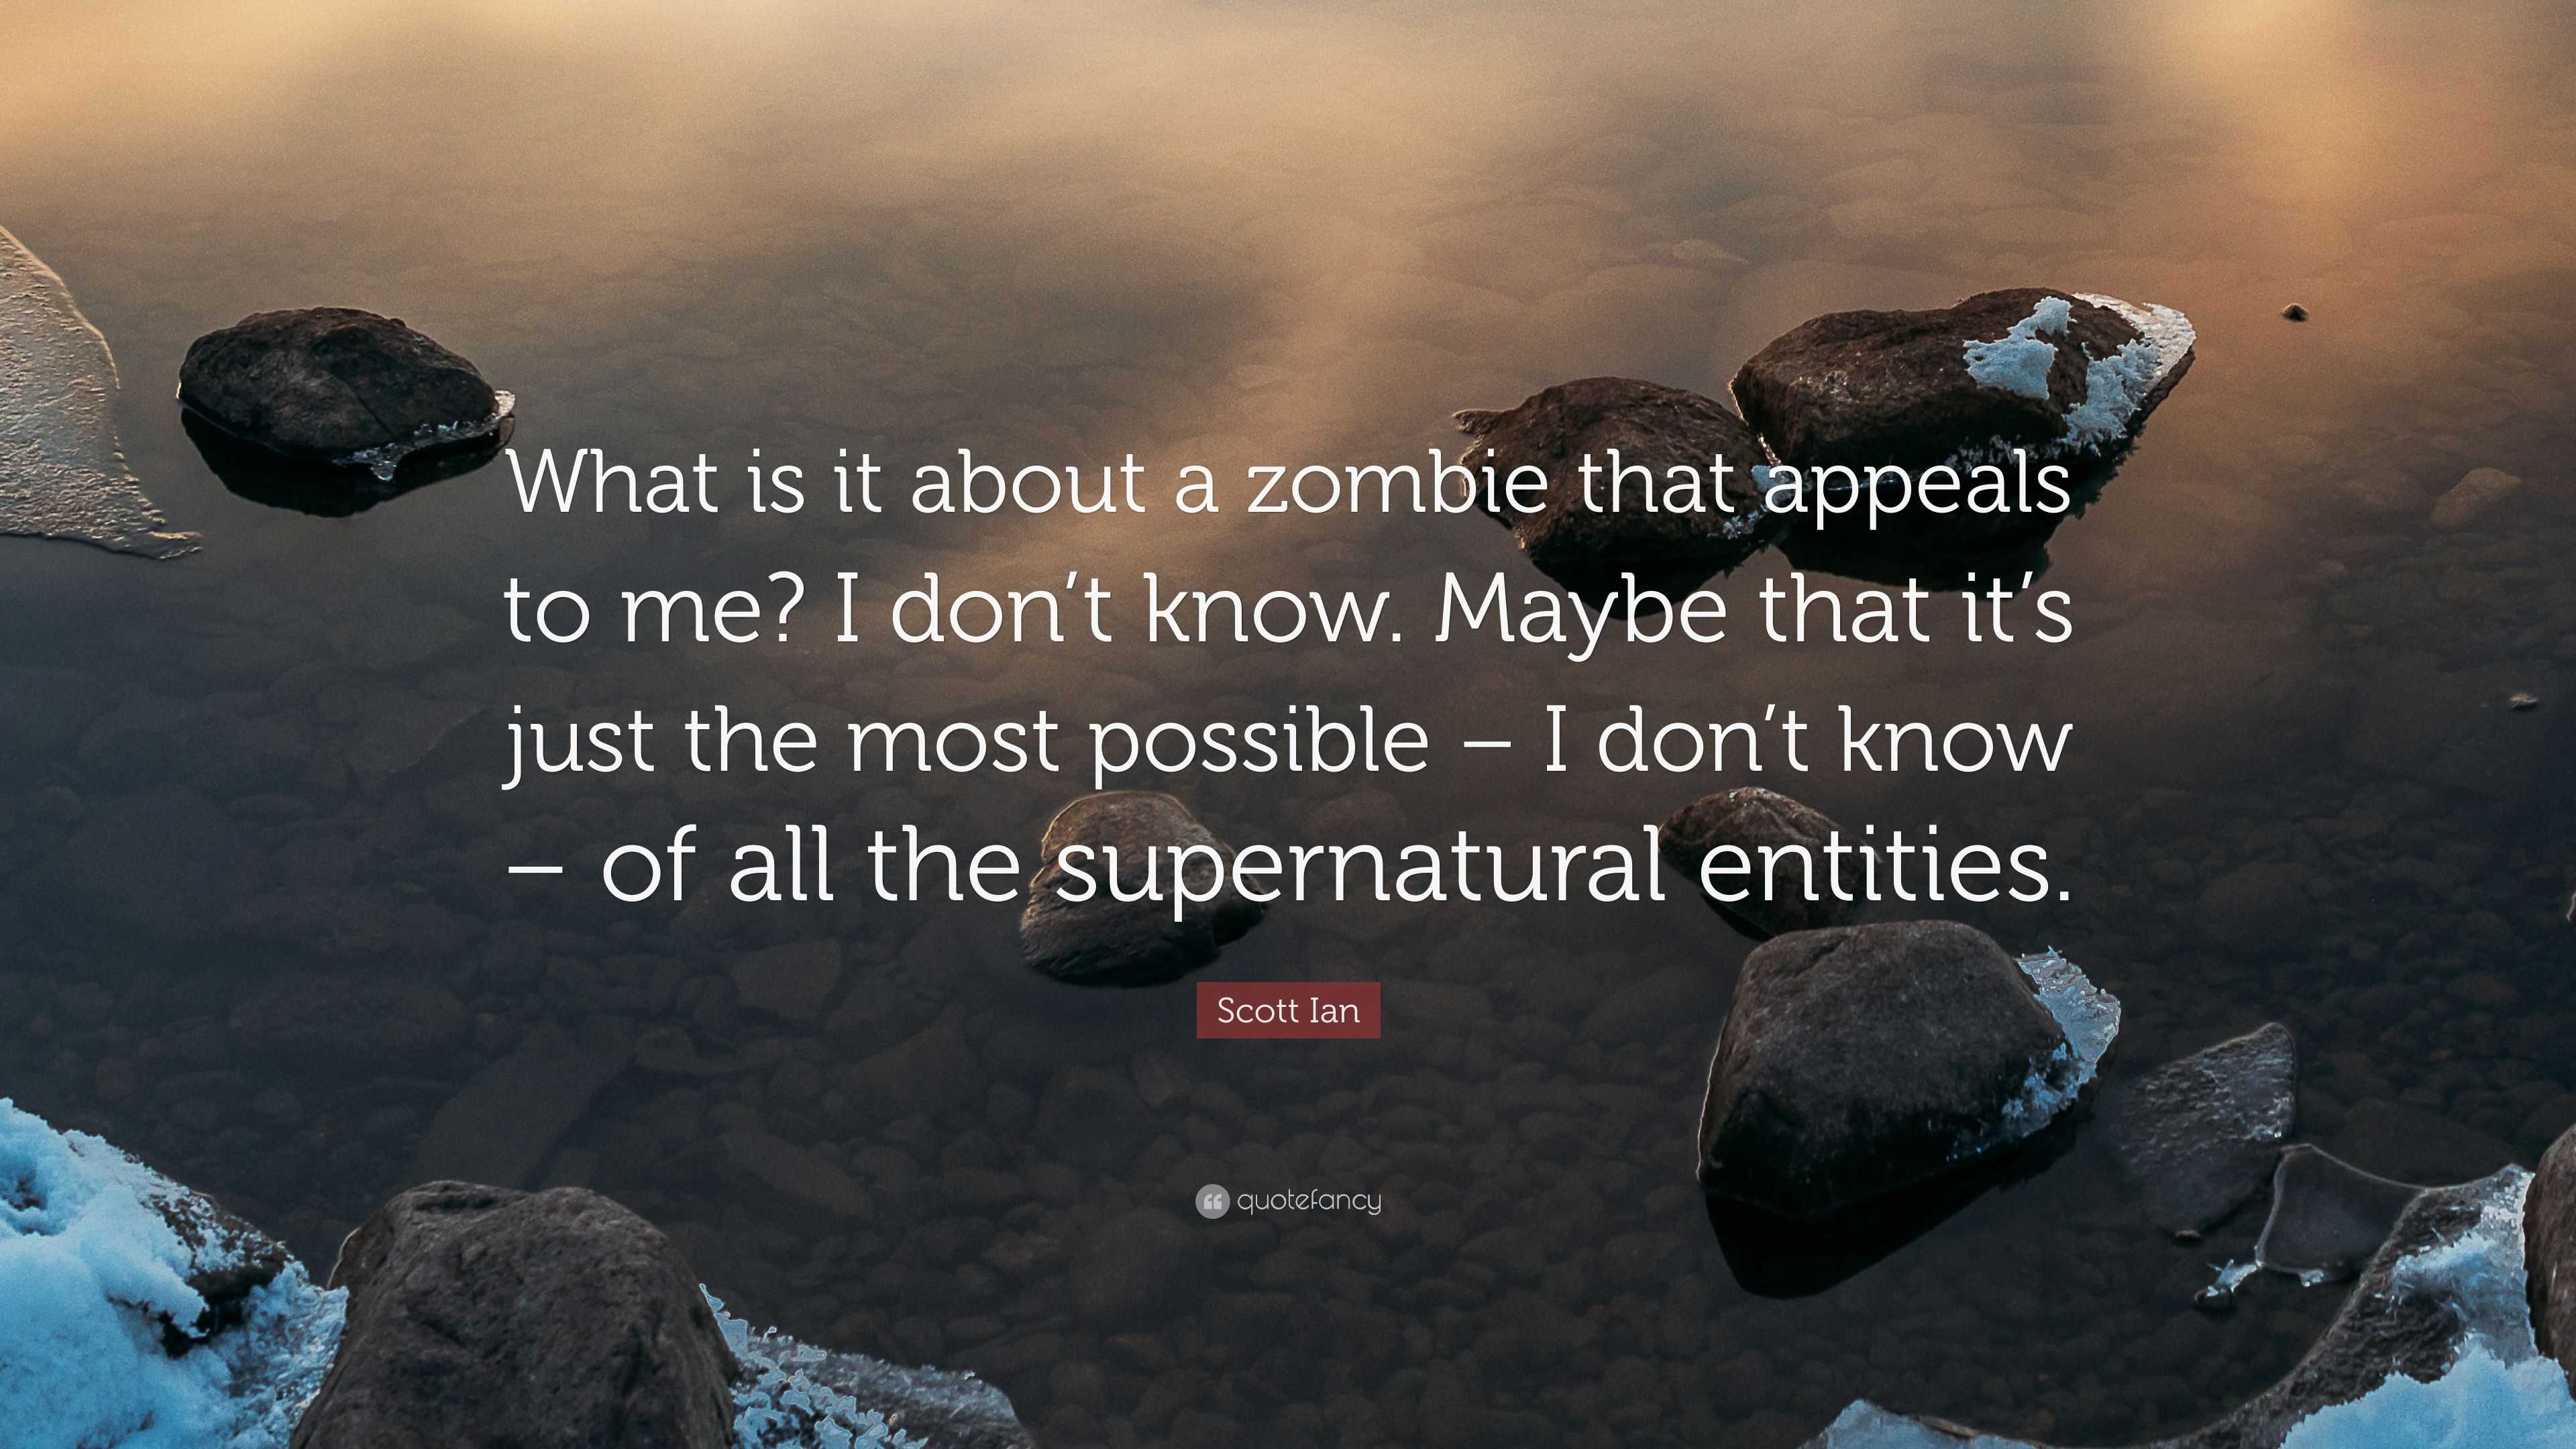 Scott Ian Quote “What is it about a zombie that appeals to me I ...